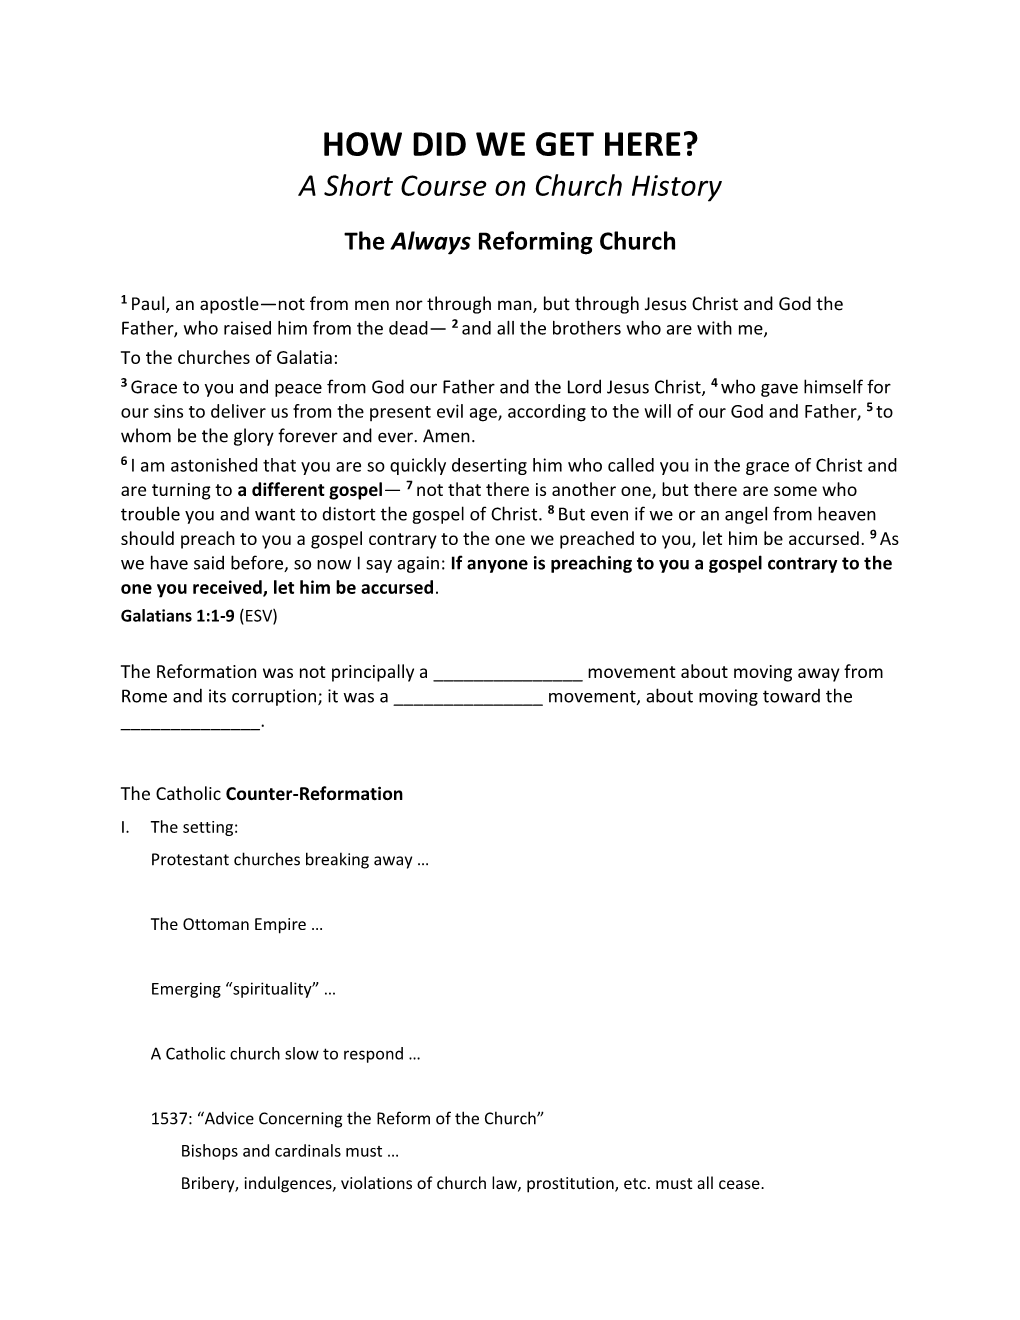 HOW DID WE GET HERE? a Short Course on Church History the Always Reforming Church